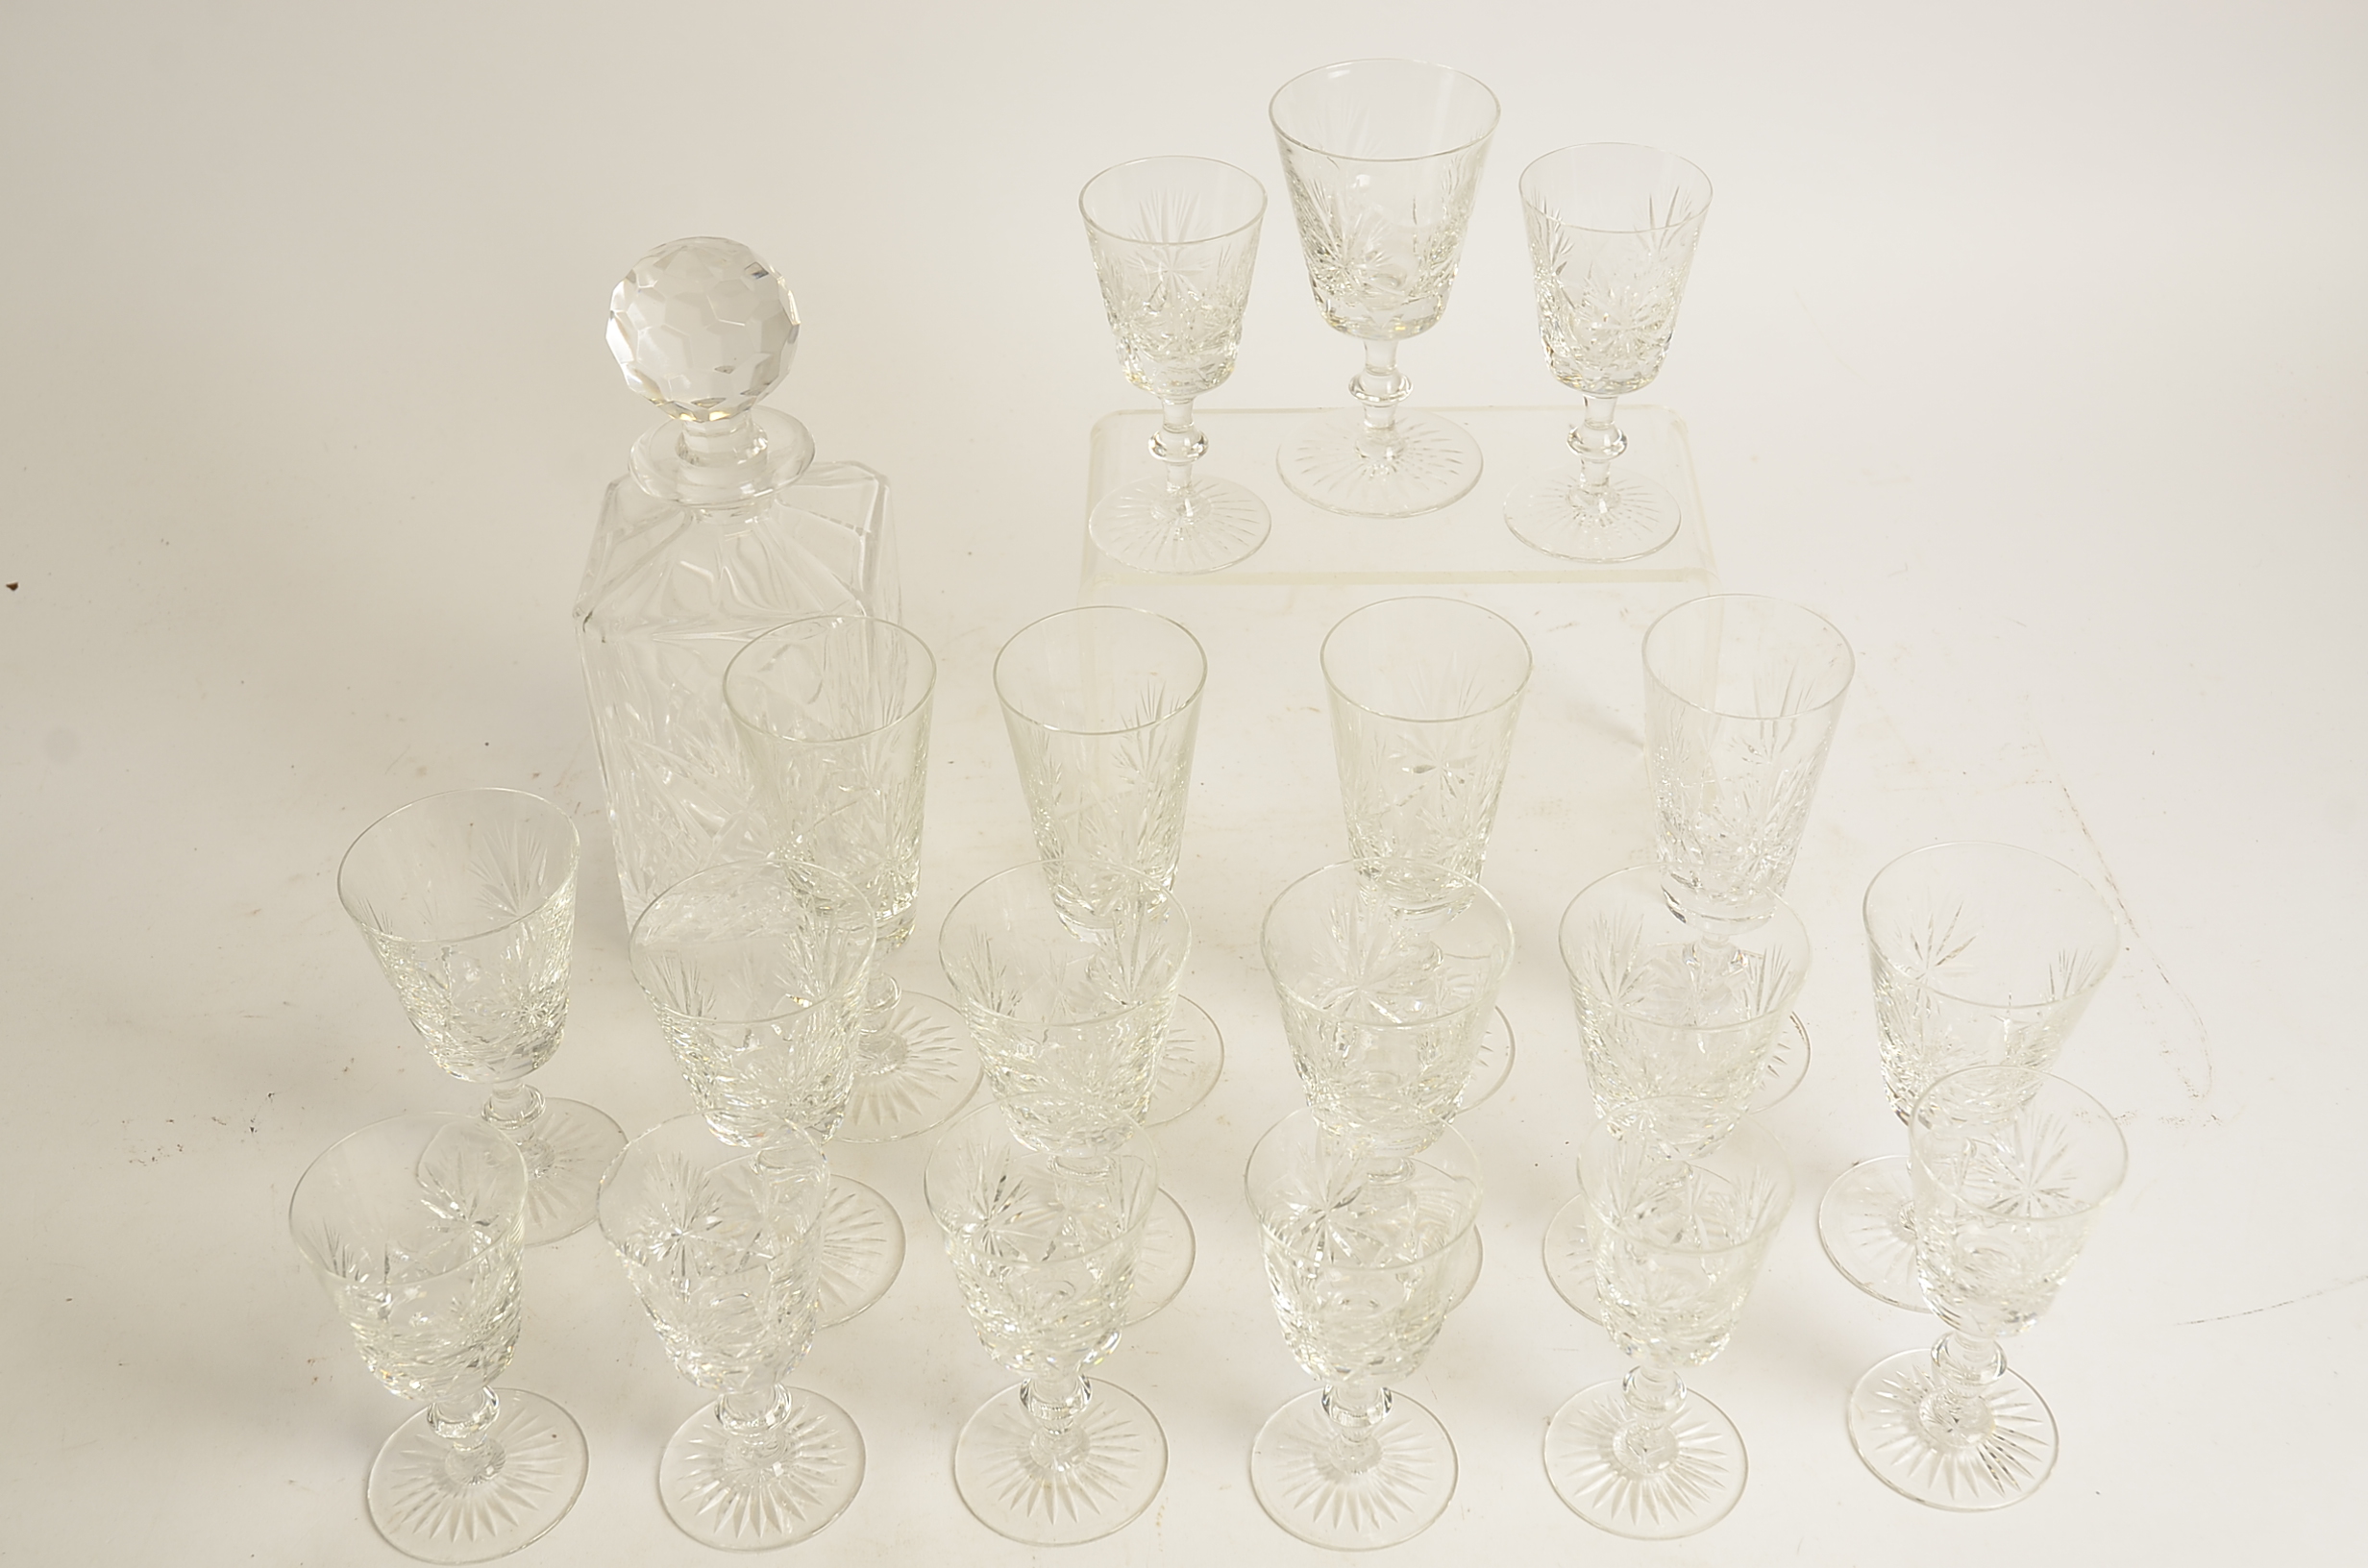 A large quantity of lead crystal drinking glasses, in three different shapes including tumblers (